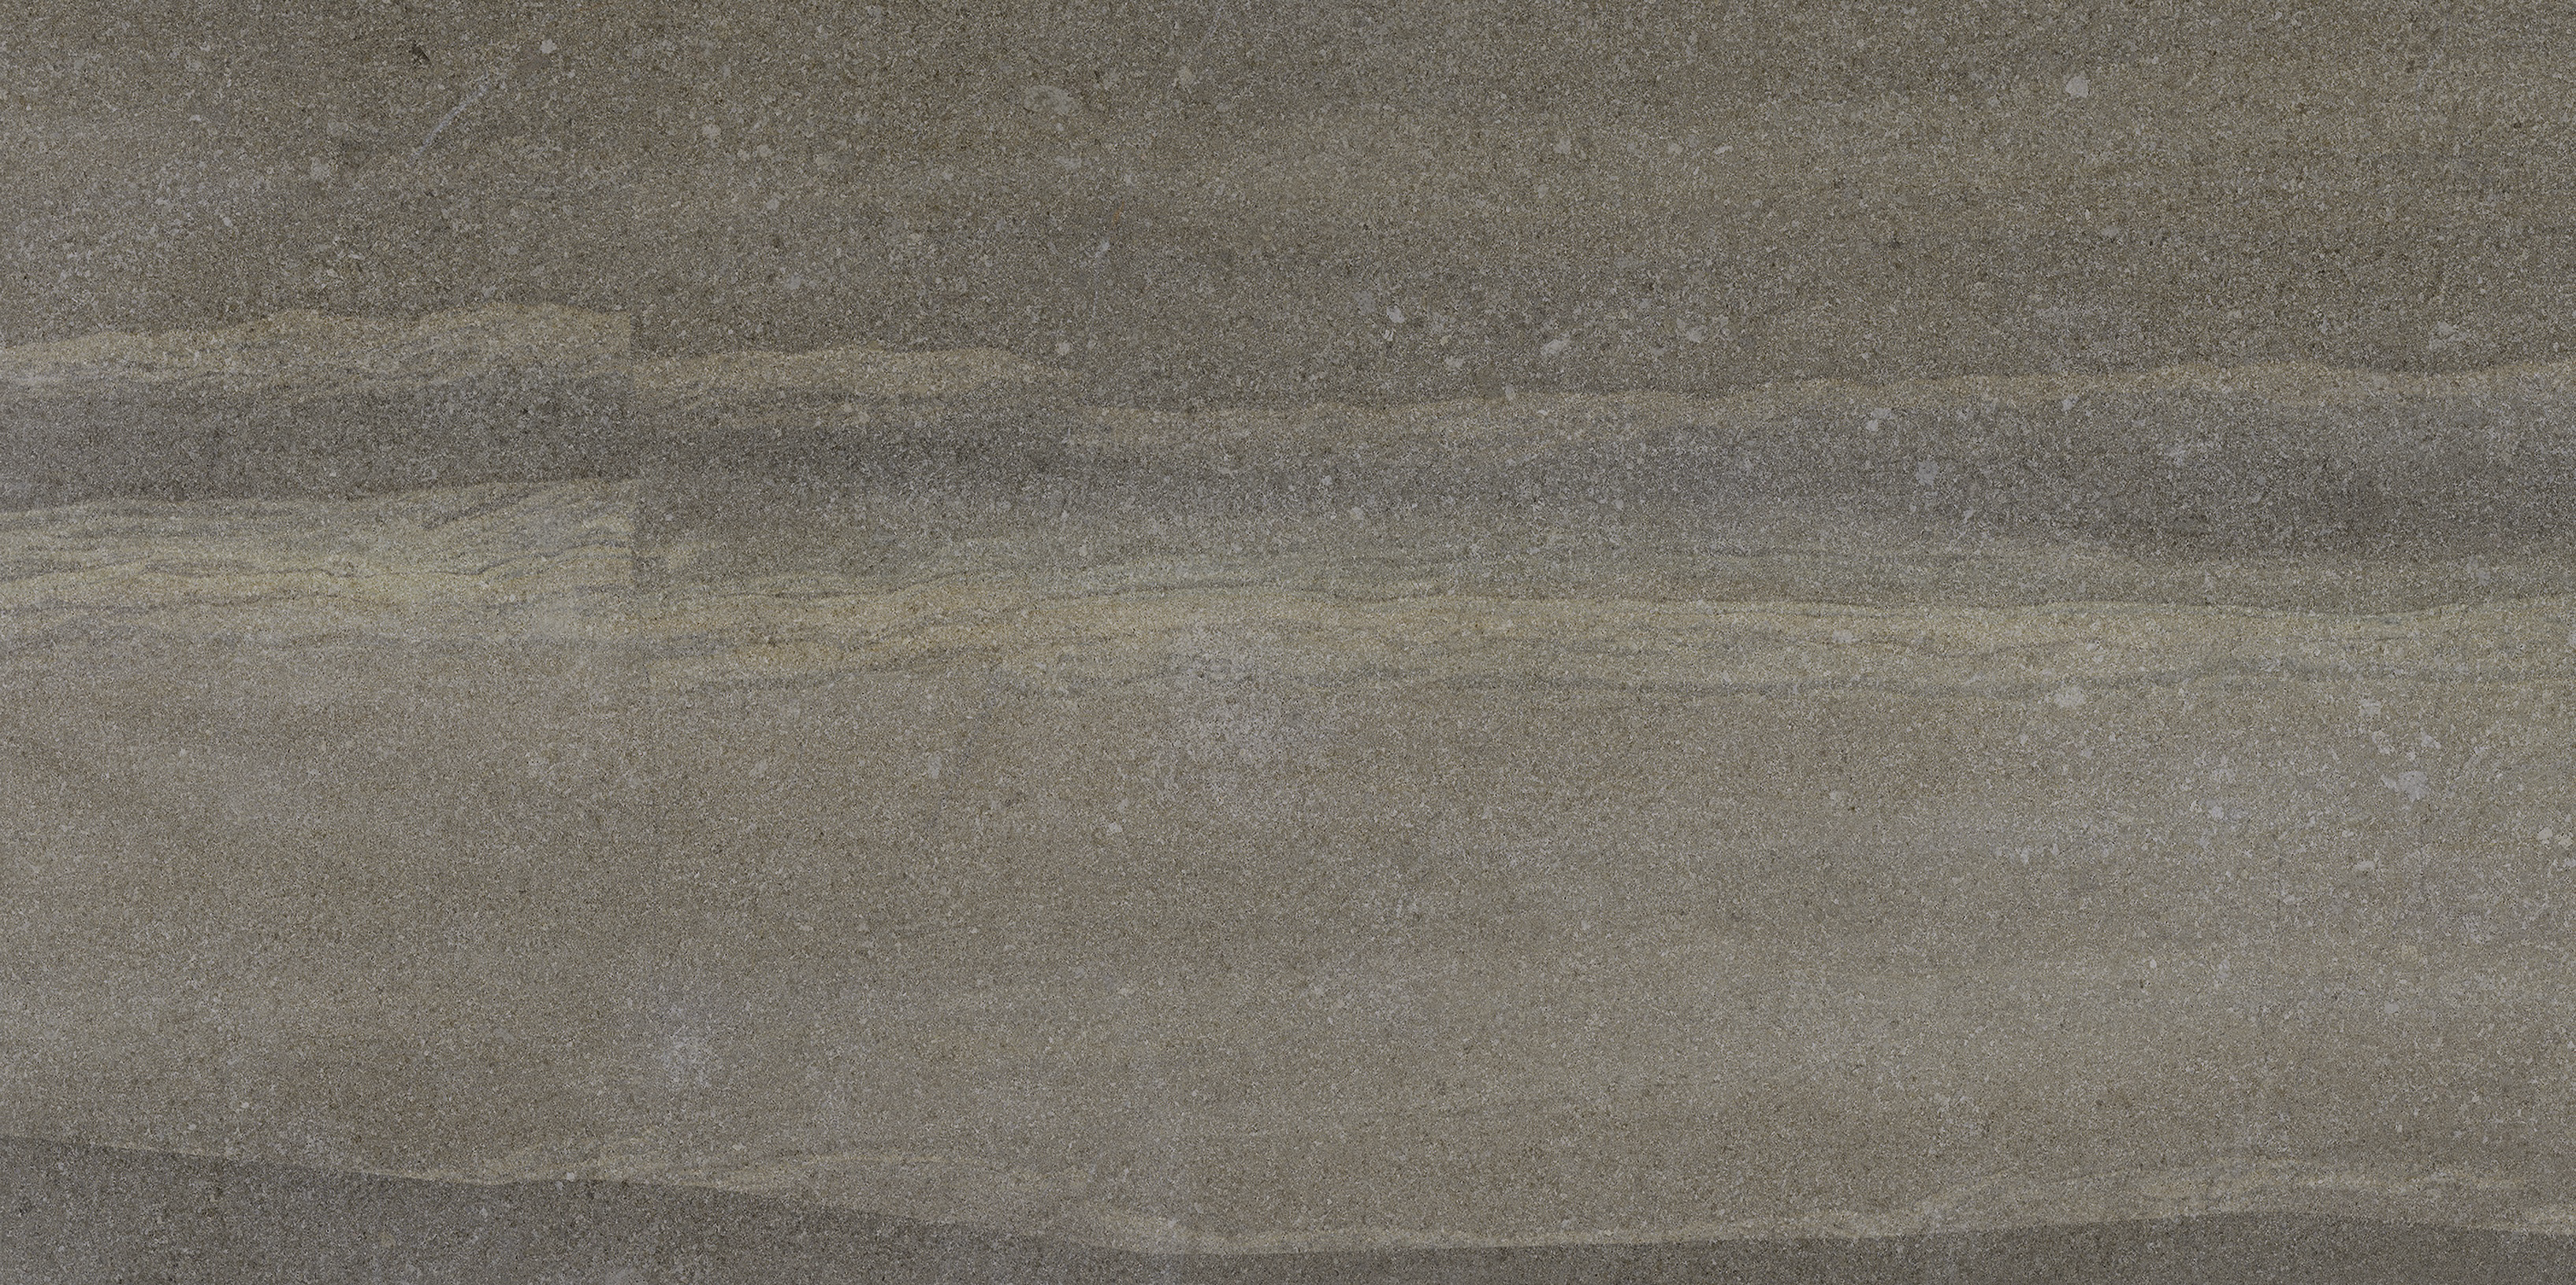 mica pattern glazed porcelain field tile from crux anatolia collection distributed by surface group international matte finish pressed edge 12x24 rectangle shape